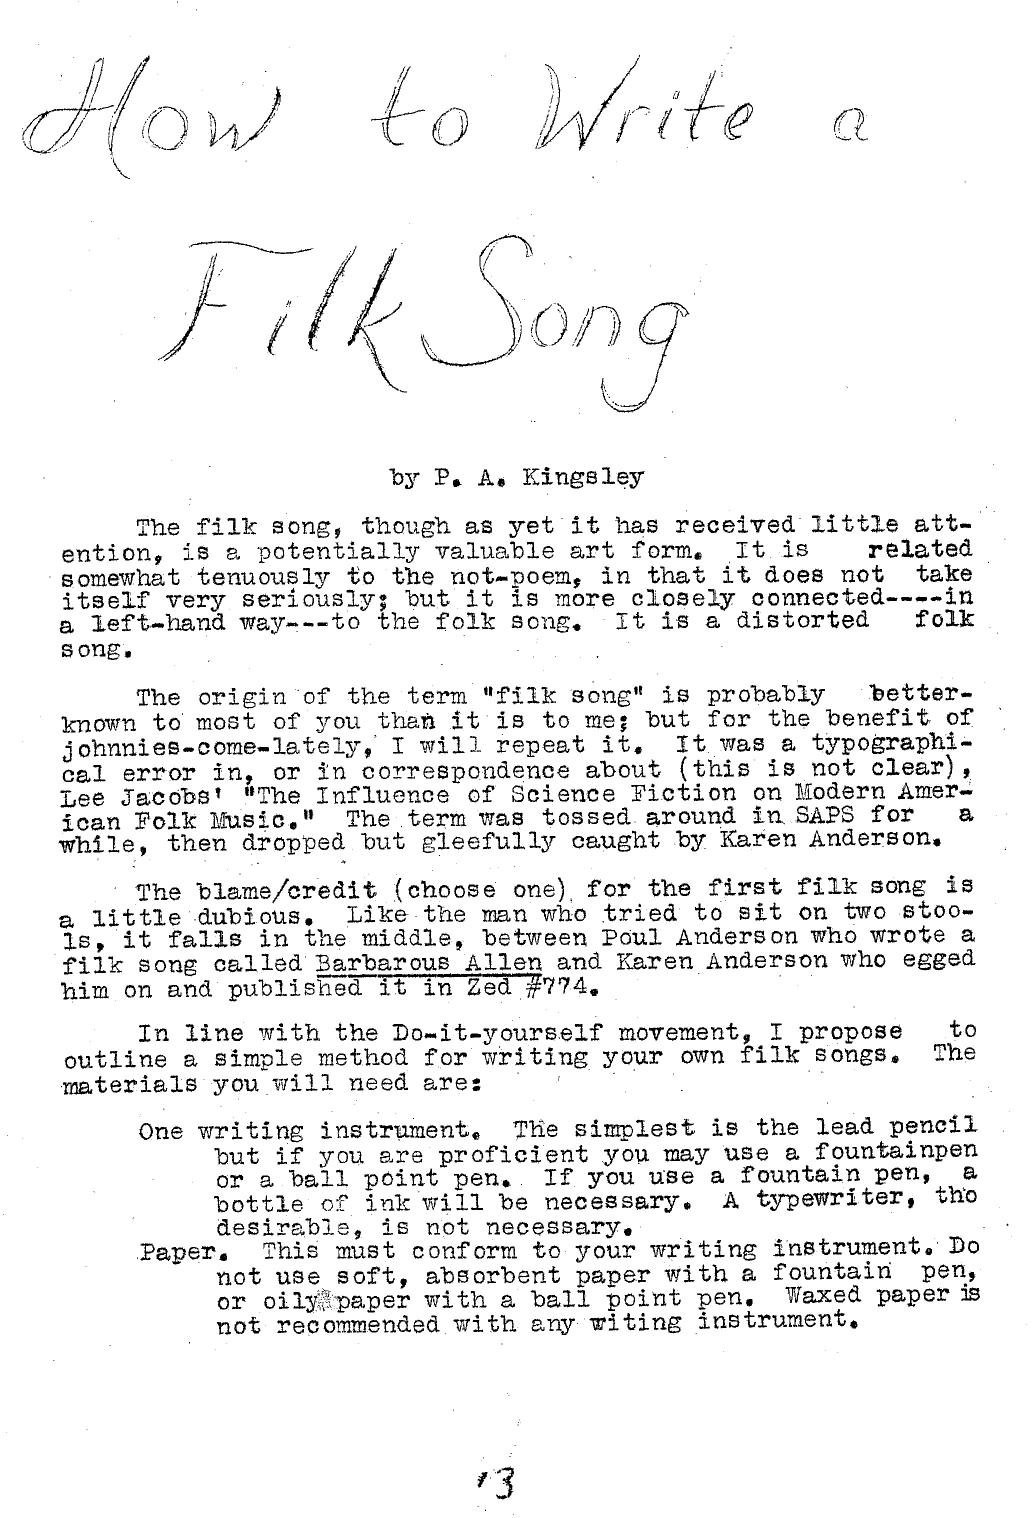 An early document about filk songs.